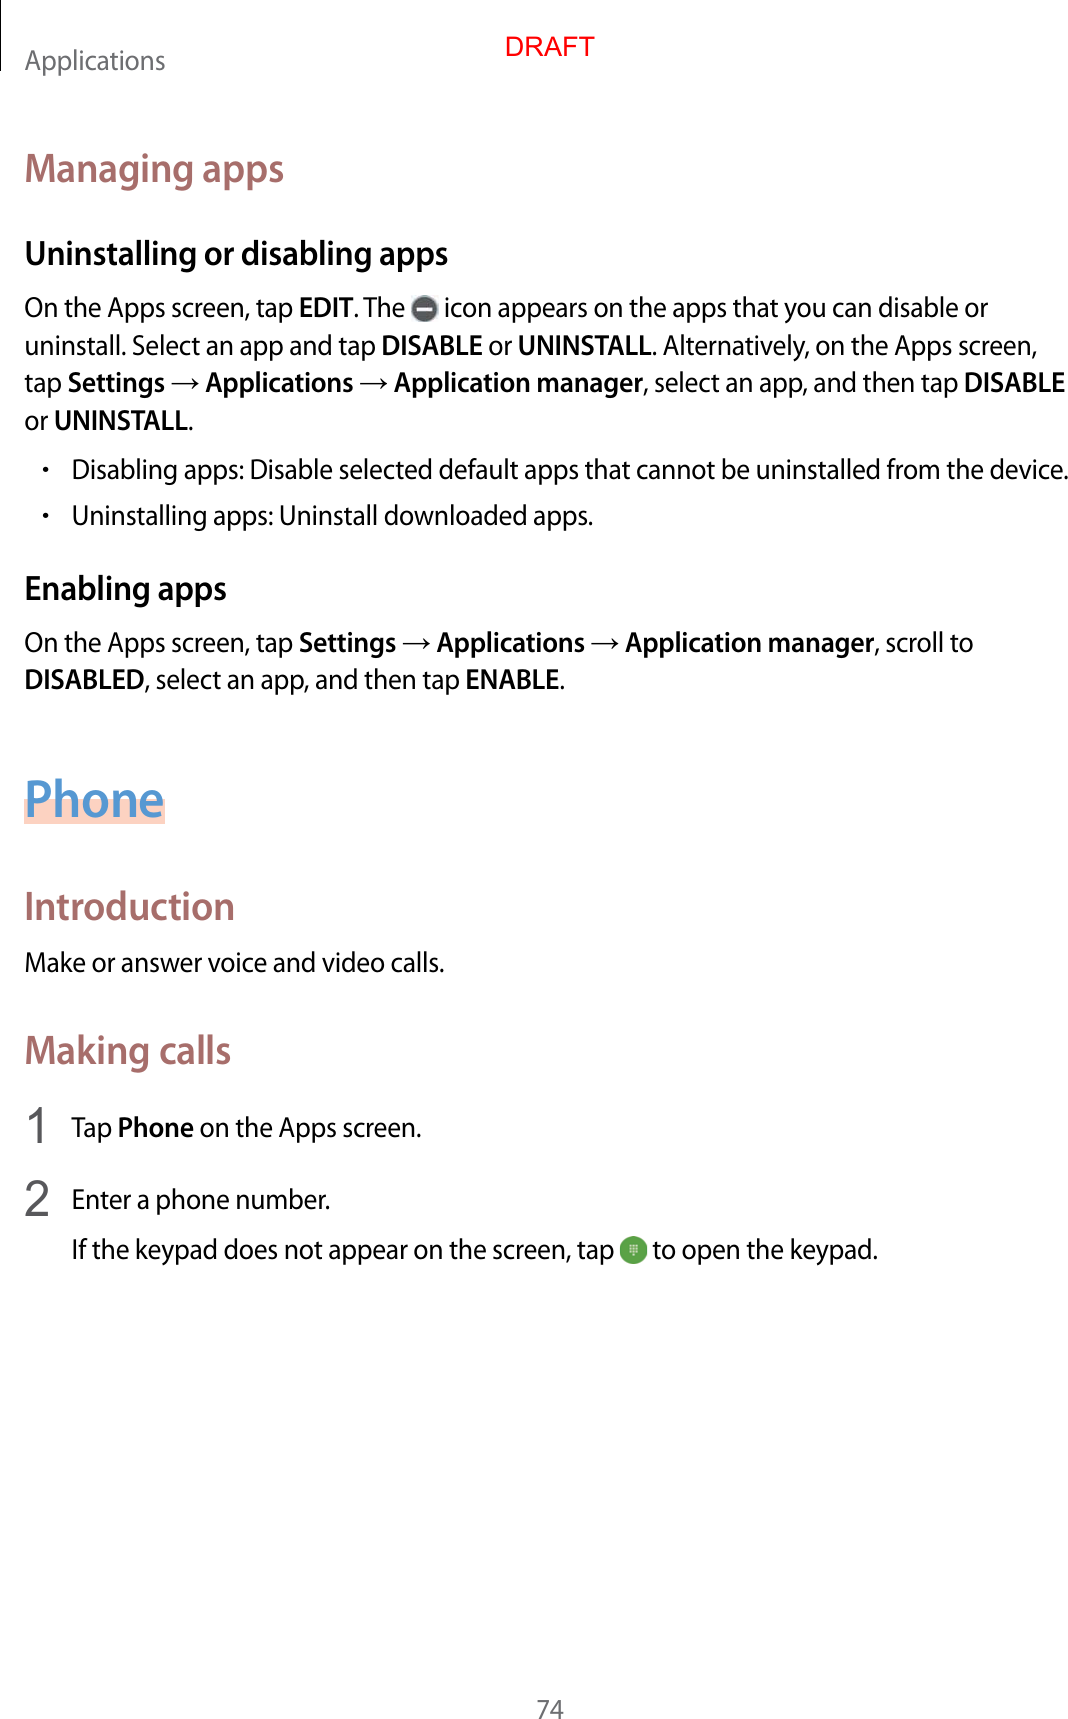 Applications74Managing appsUninstalling or disabling appsOn the Apps screen, tap EDIT. The   icon appears on the apps that you can disable or uninstall. Select an app and tap DISABLE or UNINSTALL. Alternatively, on the Apps screen, tap Settings  Applications  Application manager, select an app, and then tap DISABLE or UNINSTALL.•Disabling apps: Disable selected default apps that cannot be uninstalled from the device.•Uninstalling apps: Uninstall downloaded apps.Enabling appsOn the Apps screen, tap Settings  Applications  Application manager, scroll to DISABLED, select an app, and then tap ENABLE.PhoneIntroductionMake or answer voice and video calls.Making calls1  Tap Phone on the Apps screen.2  Enter a phone number.If the keypad does not appear on the screen, tap   to open the keypad.DRAFT